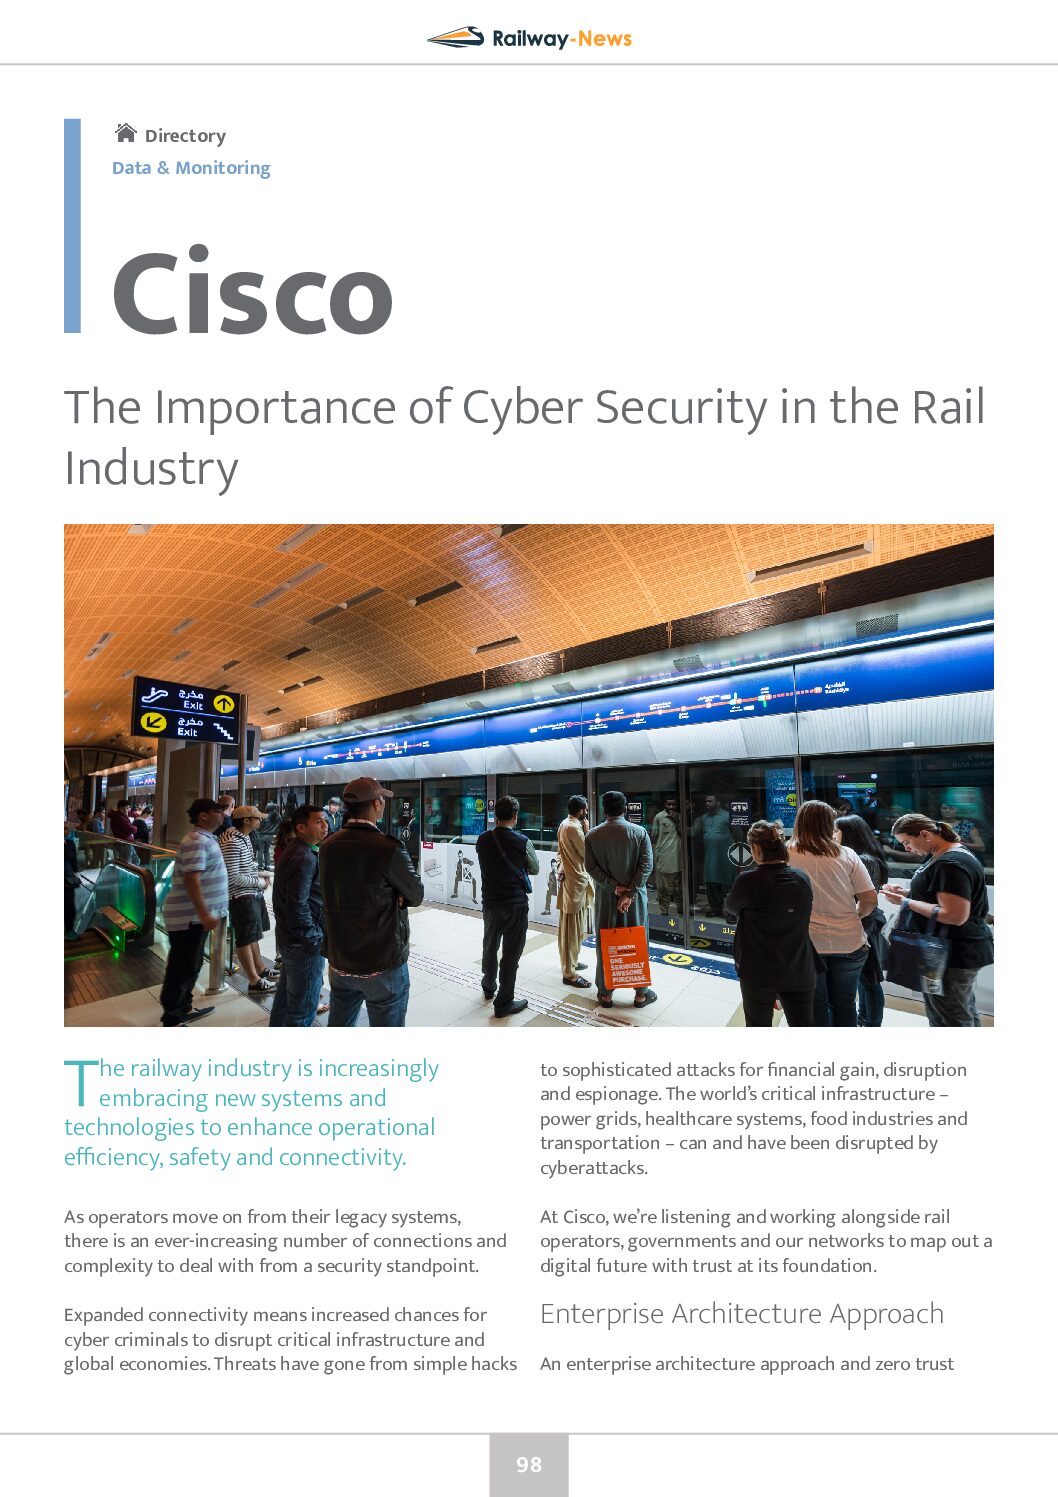 The Importance of Cyber Security in the Rail Industry